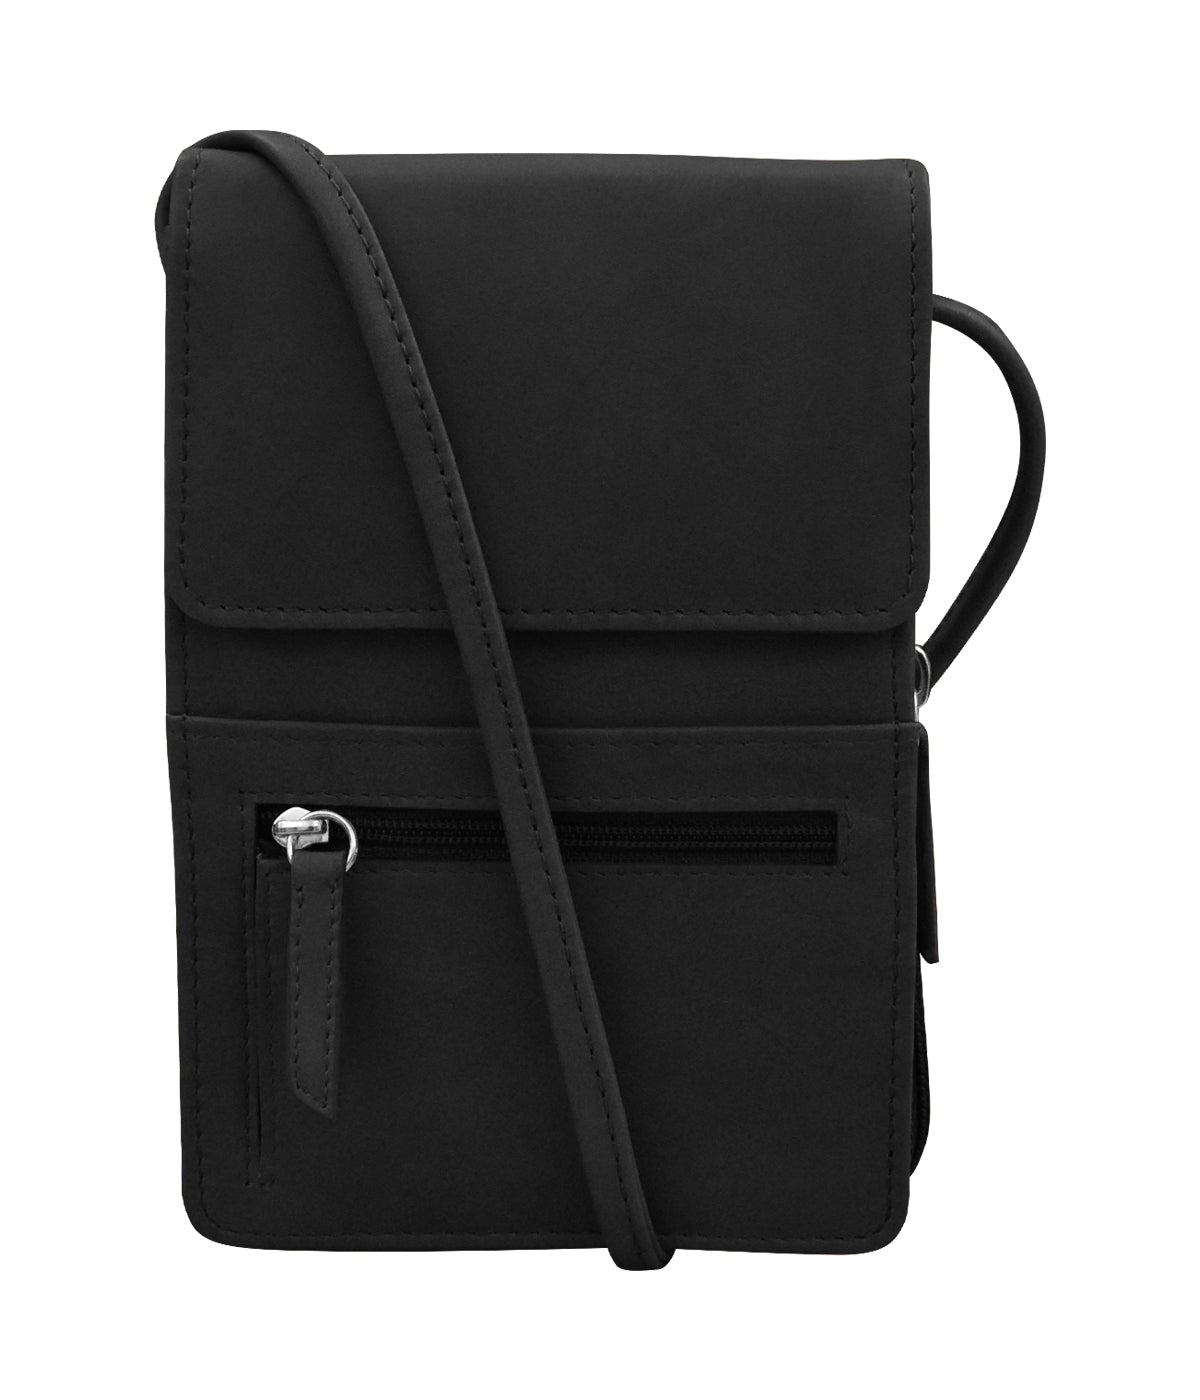 Leather Small Organizer On String Black